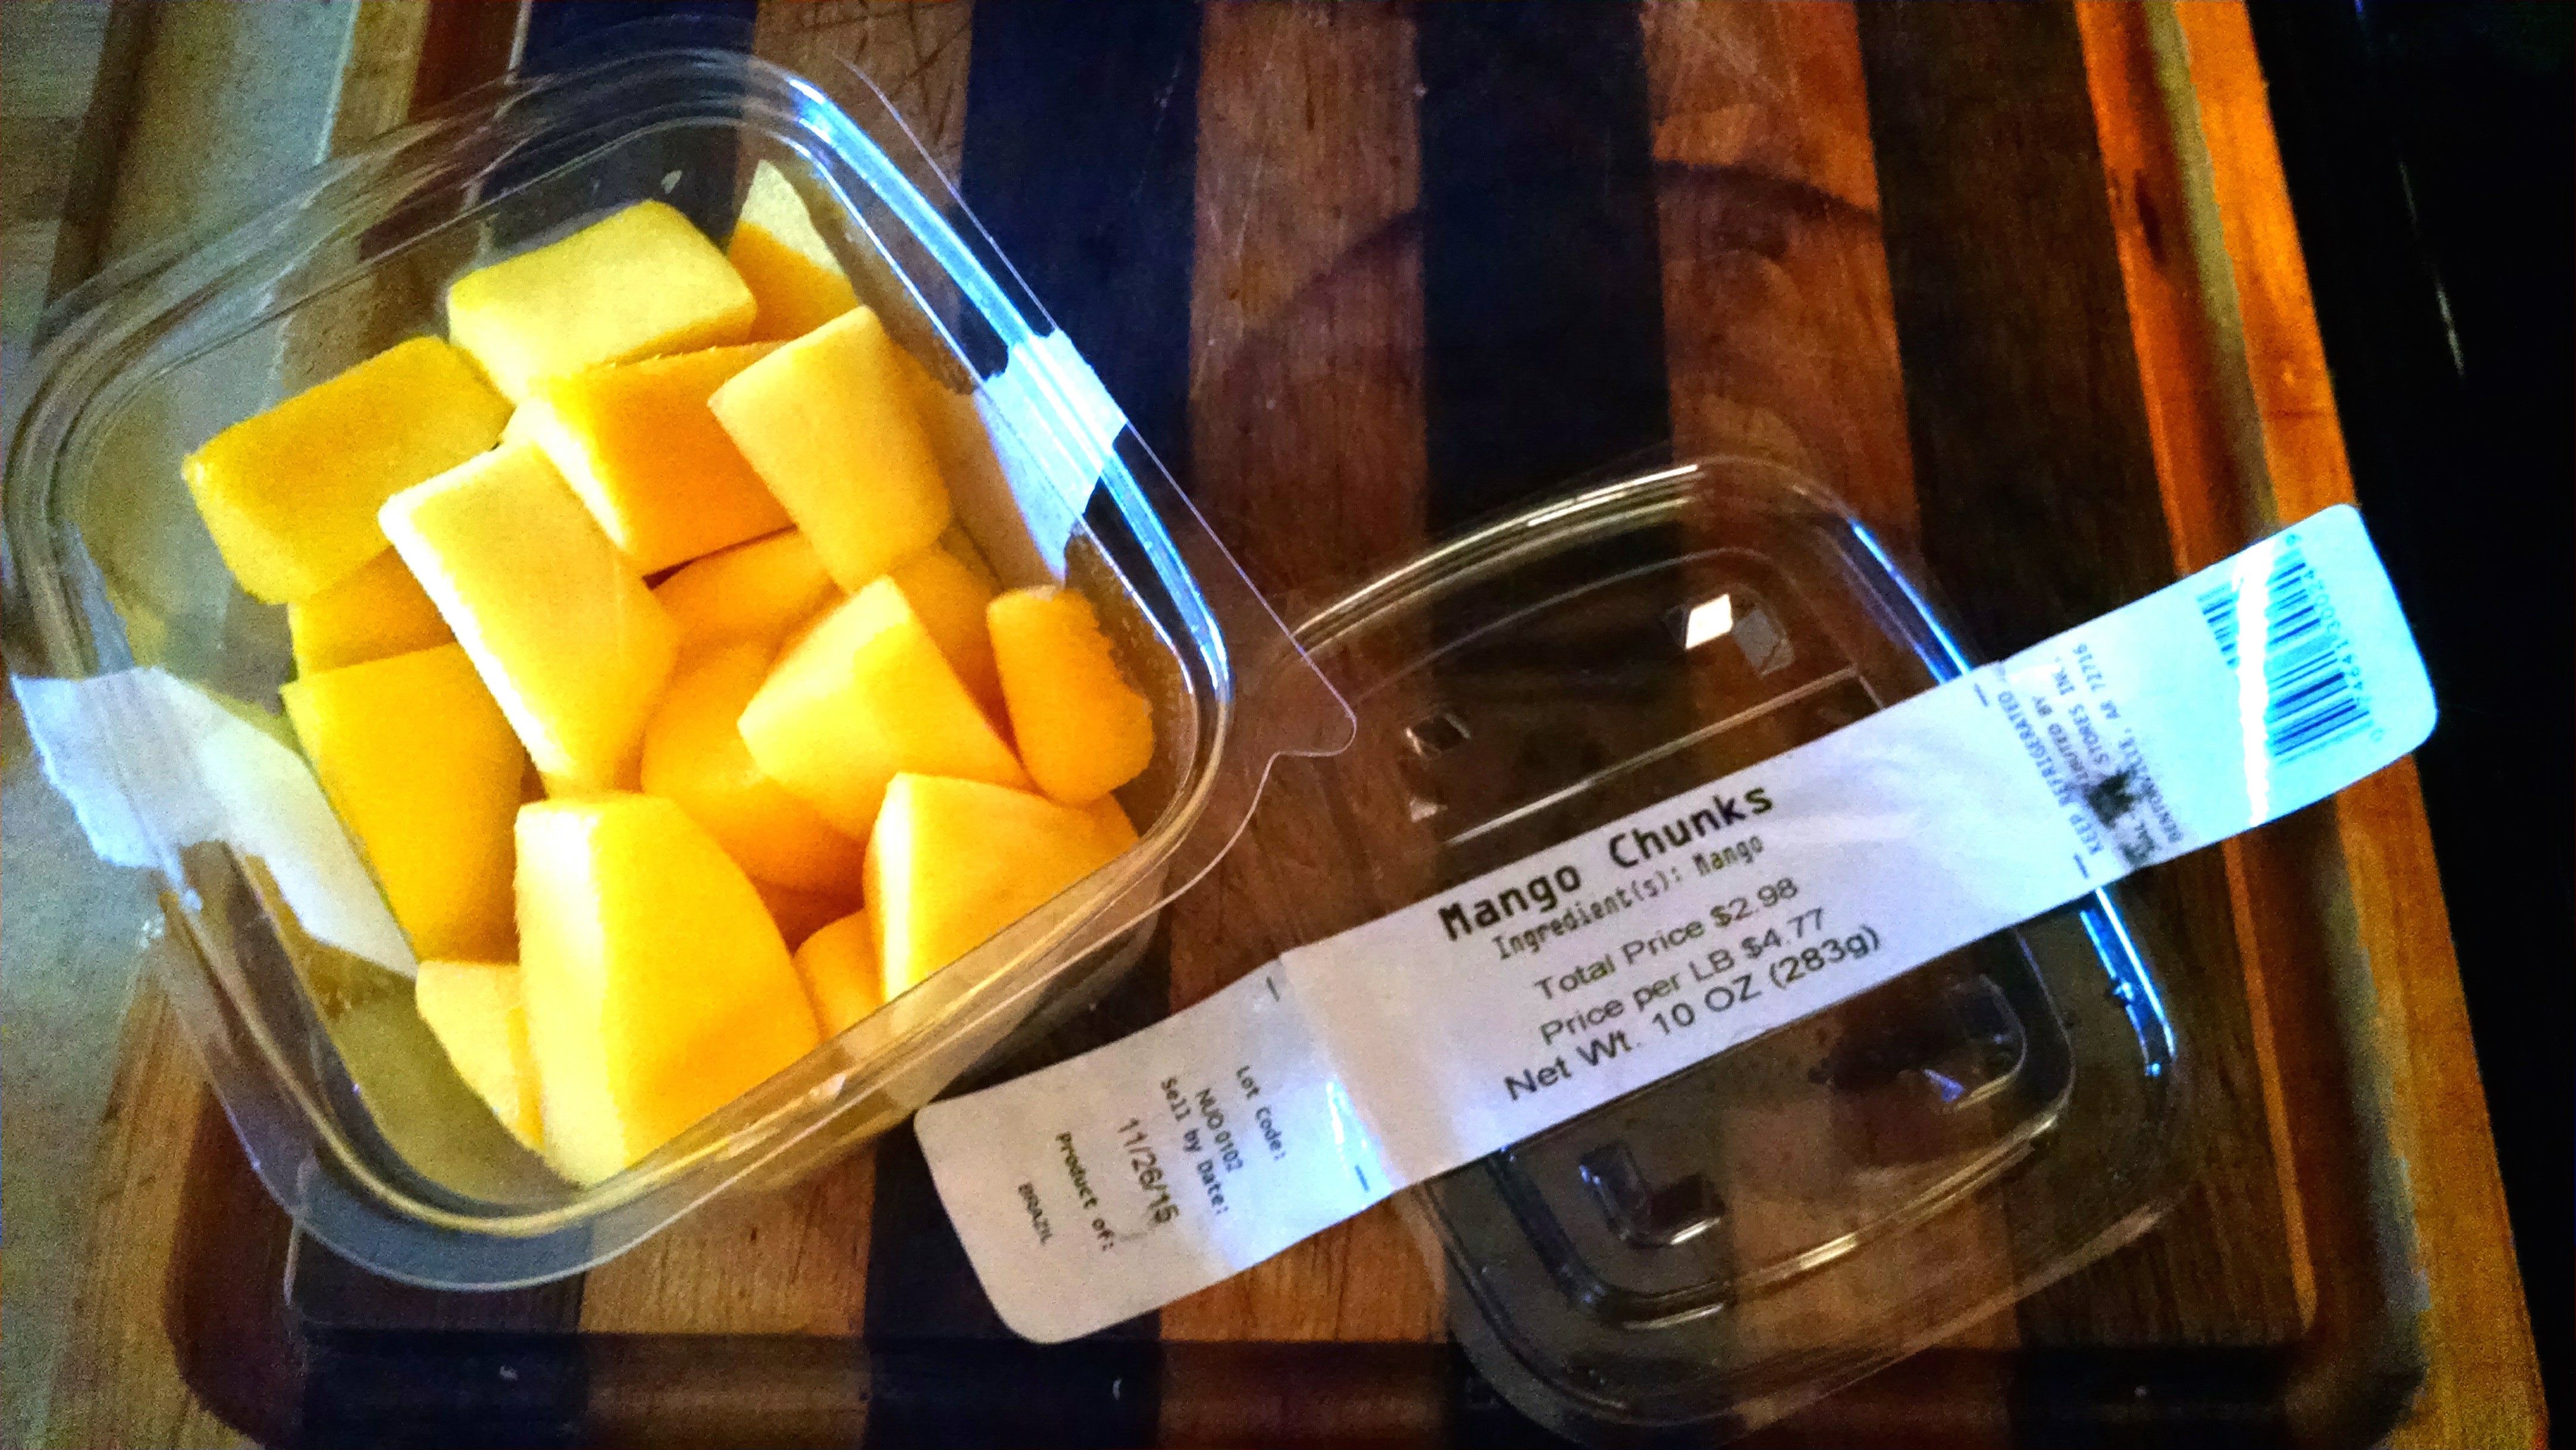 Labels on fresh-cut mango packages showing traceback information. 